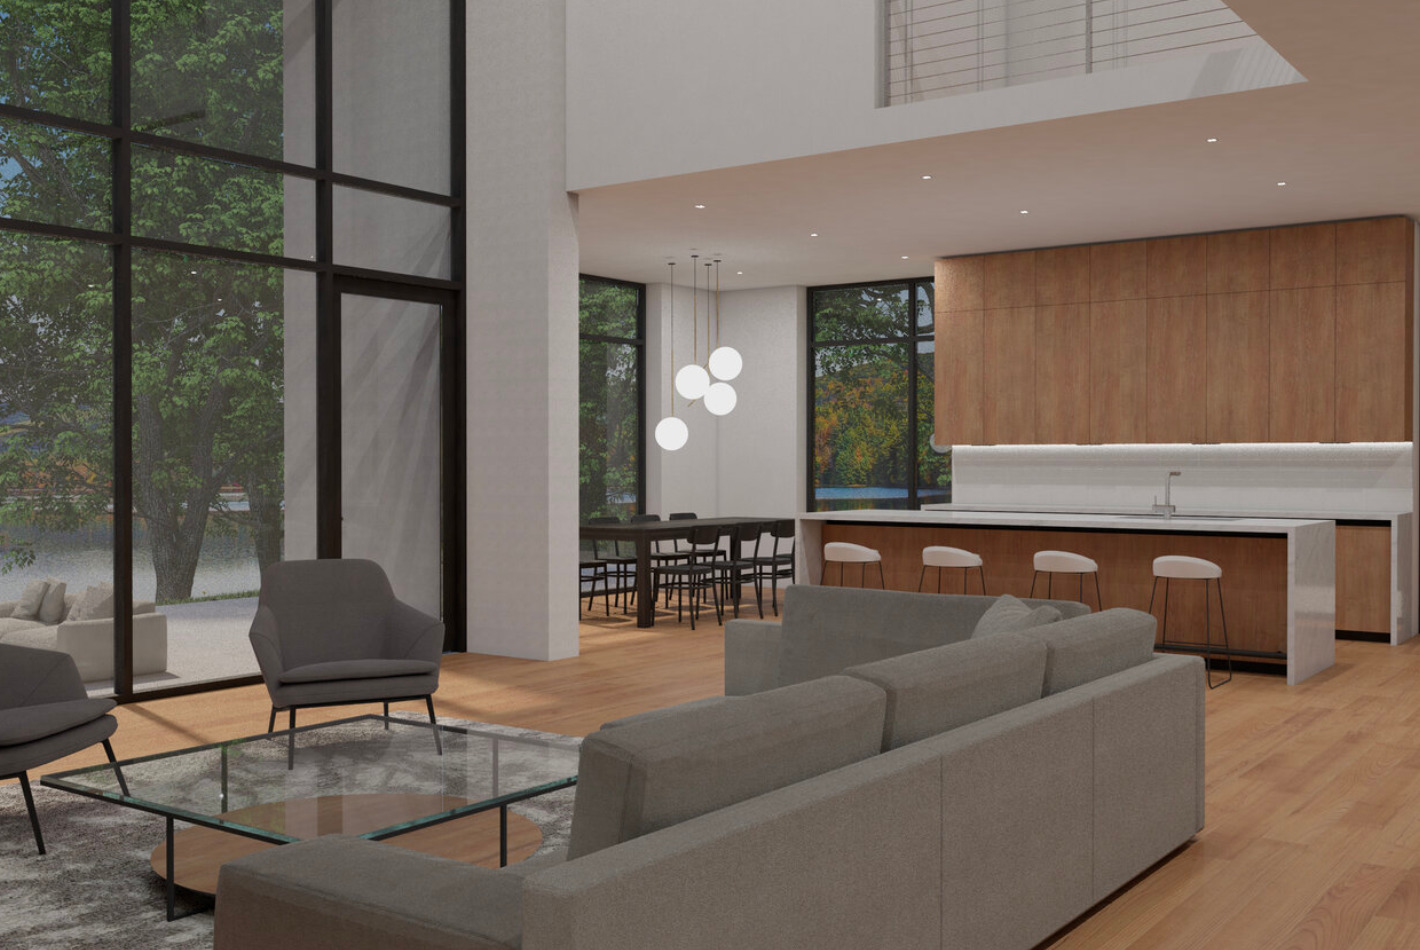 Clean-lined modernist furniture populates a seating area adjacent to a wood-paneled kitchen in this lake front house.